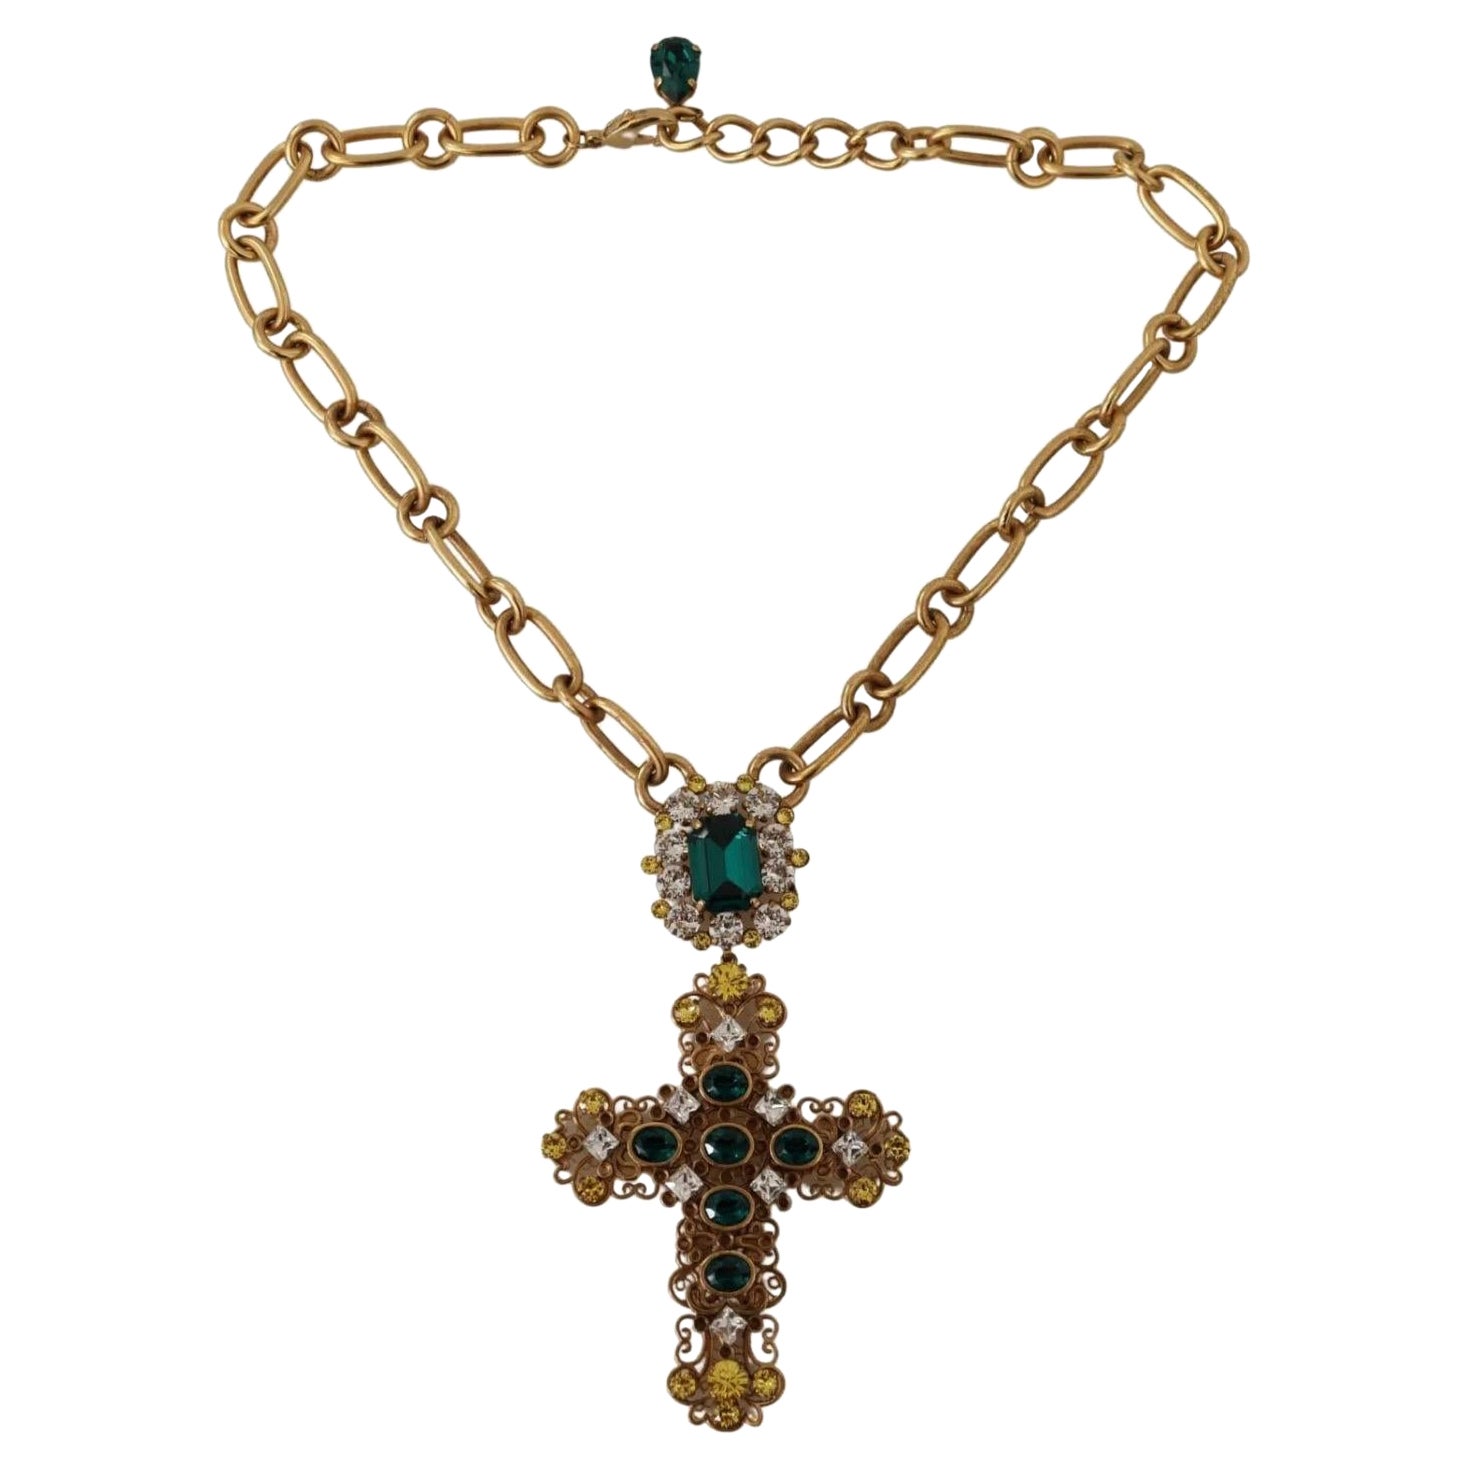 Dolce & Gabbana Gold tone chain necklace with multicolor cross crystals pendant